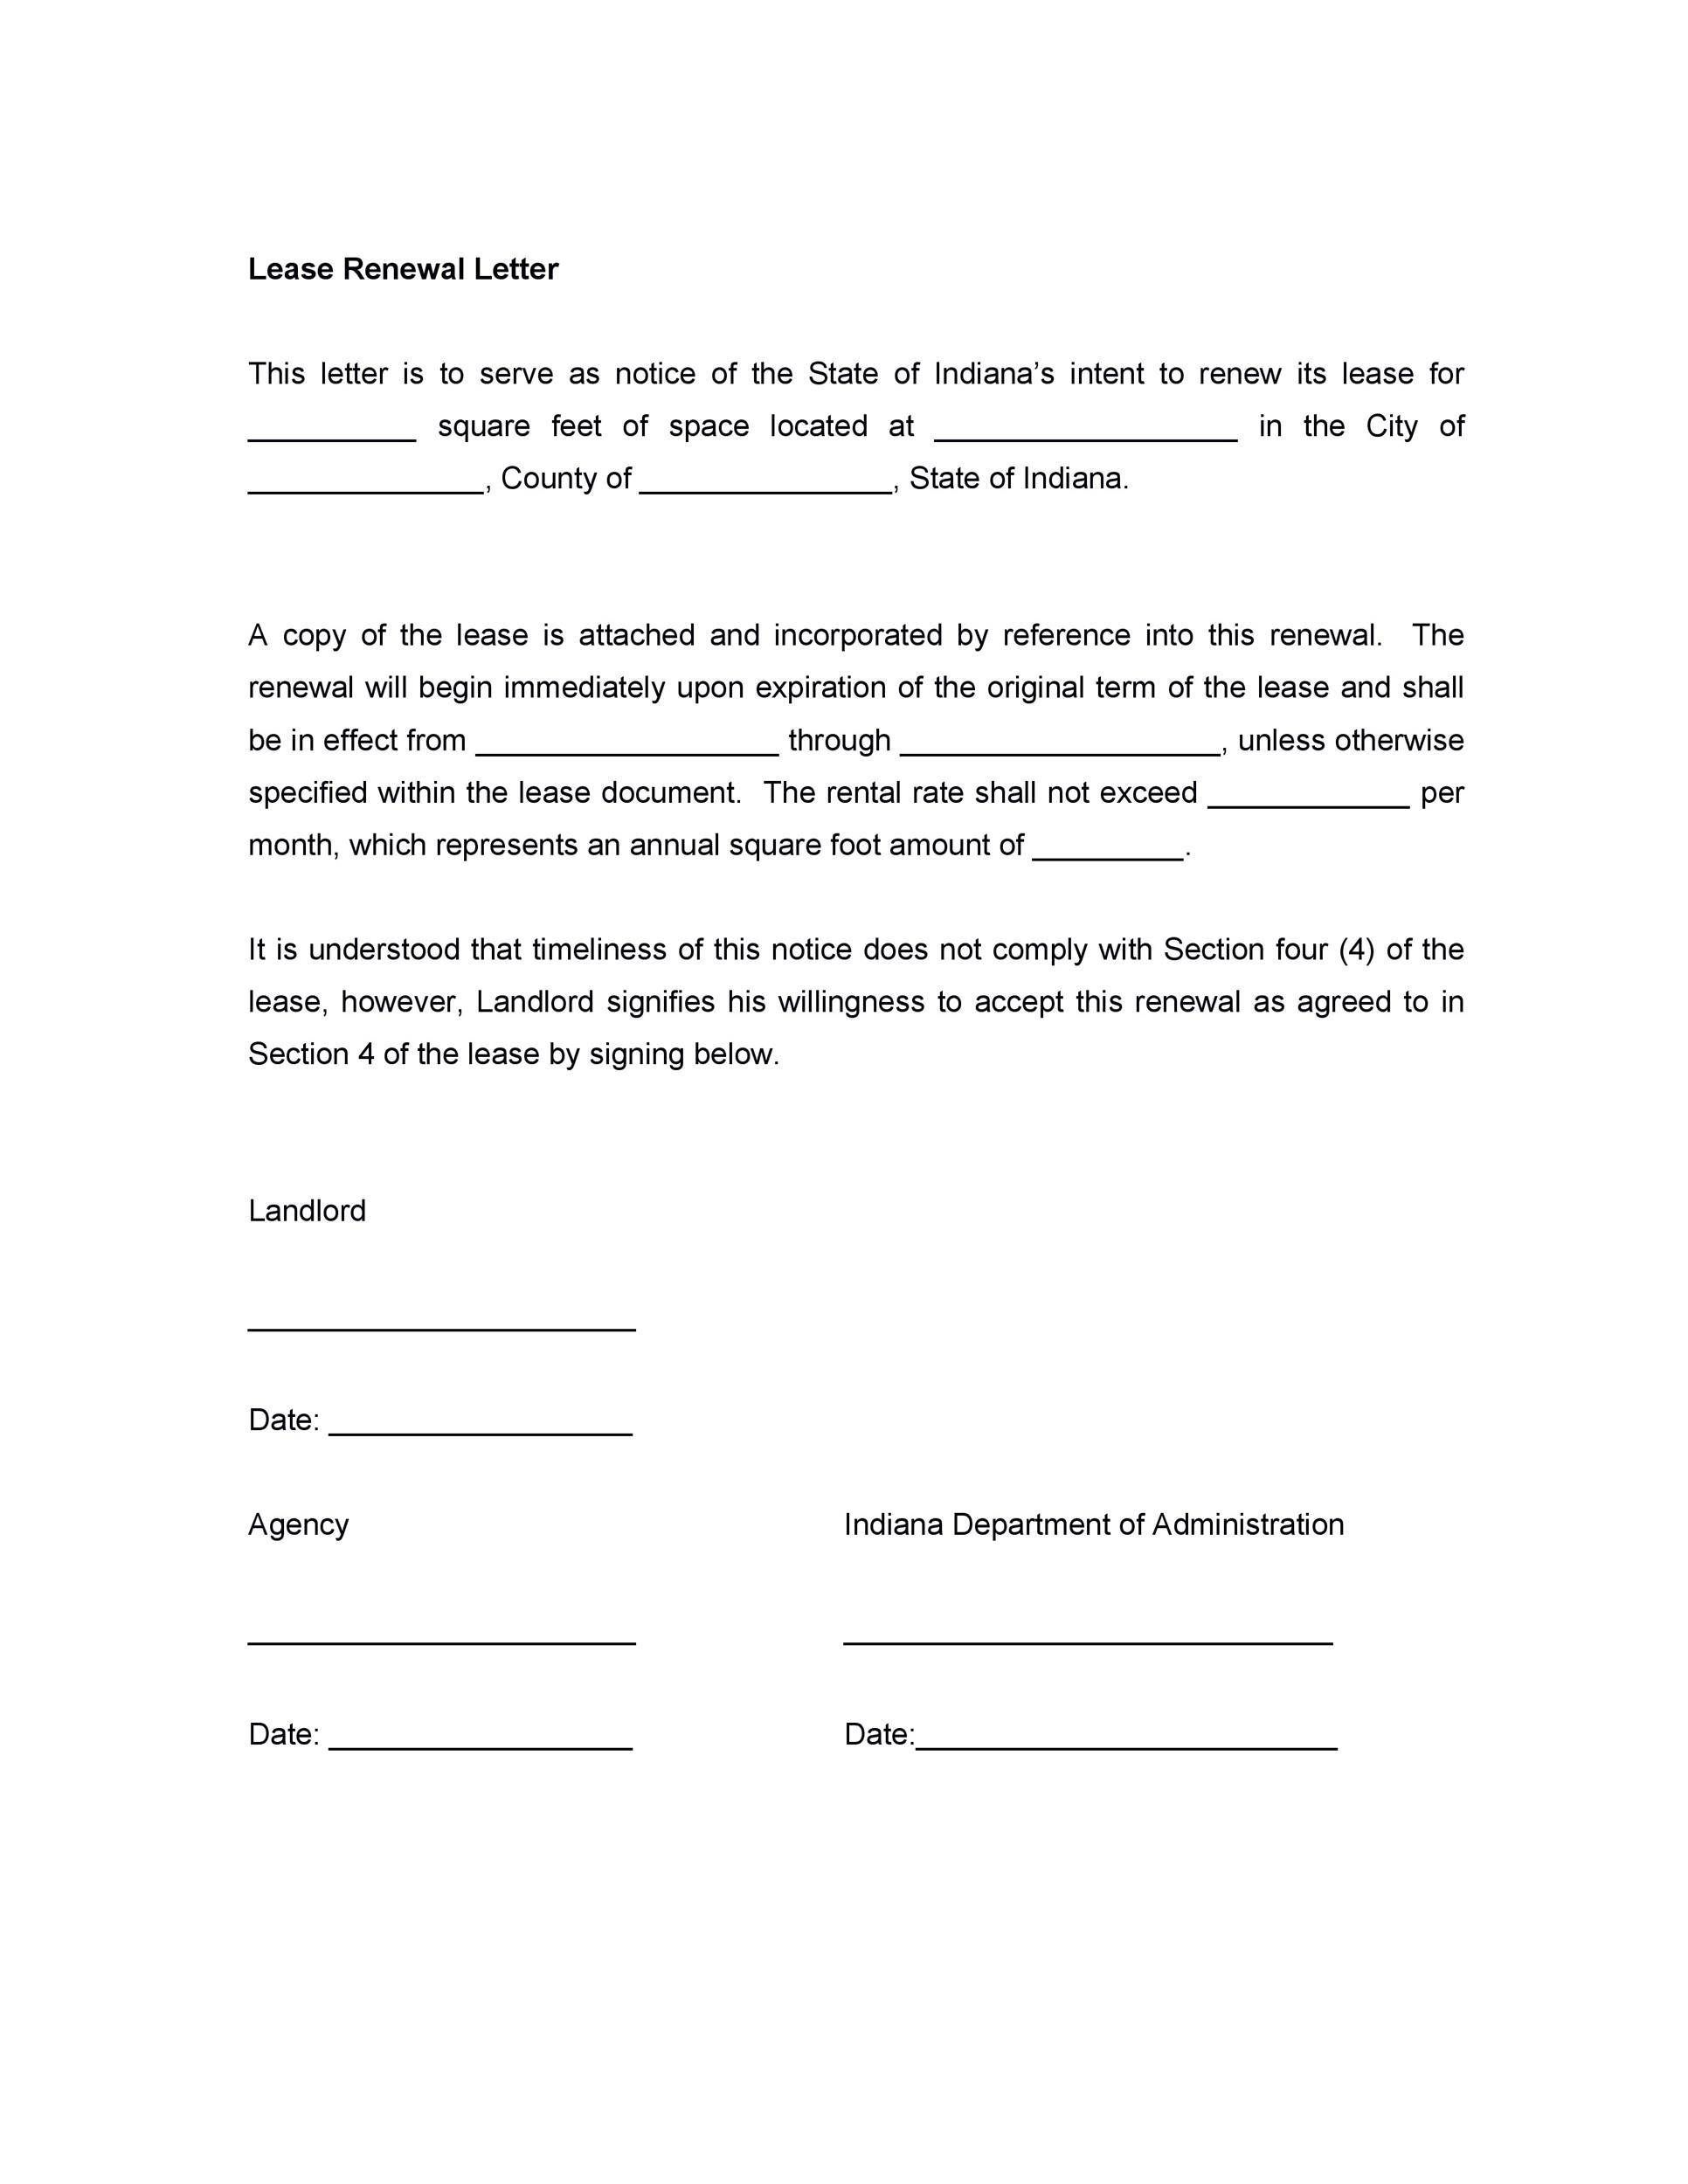 Free lease renewal letter 12